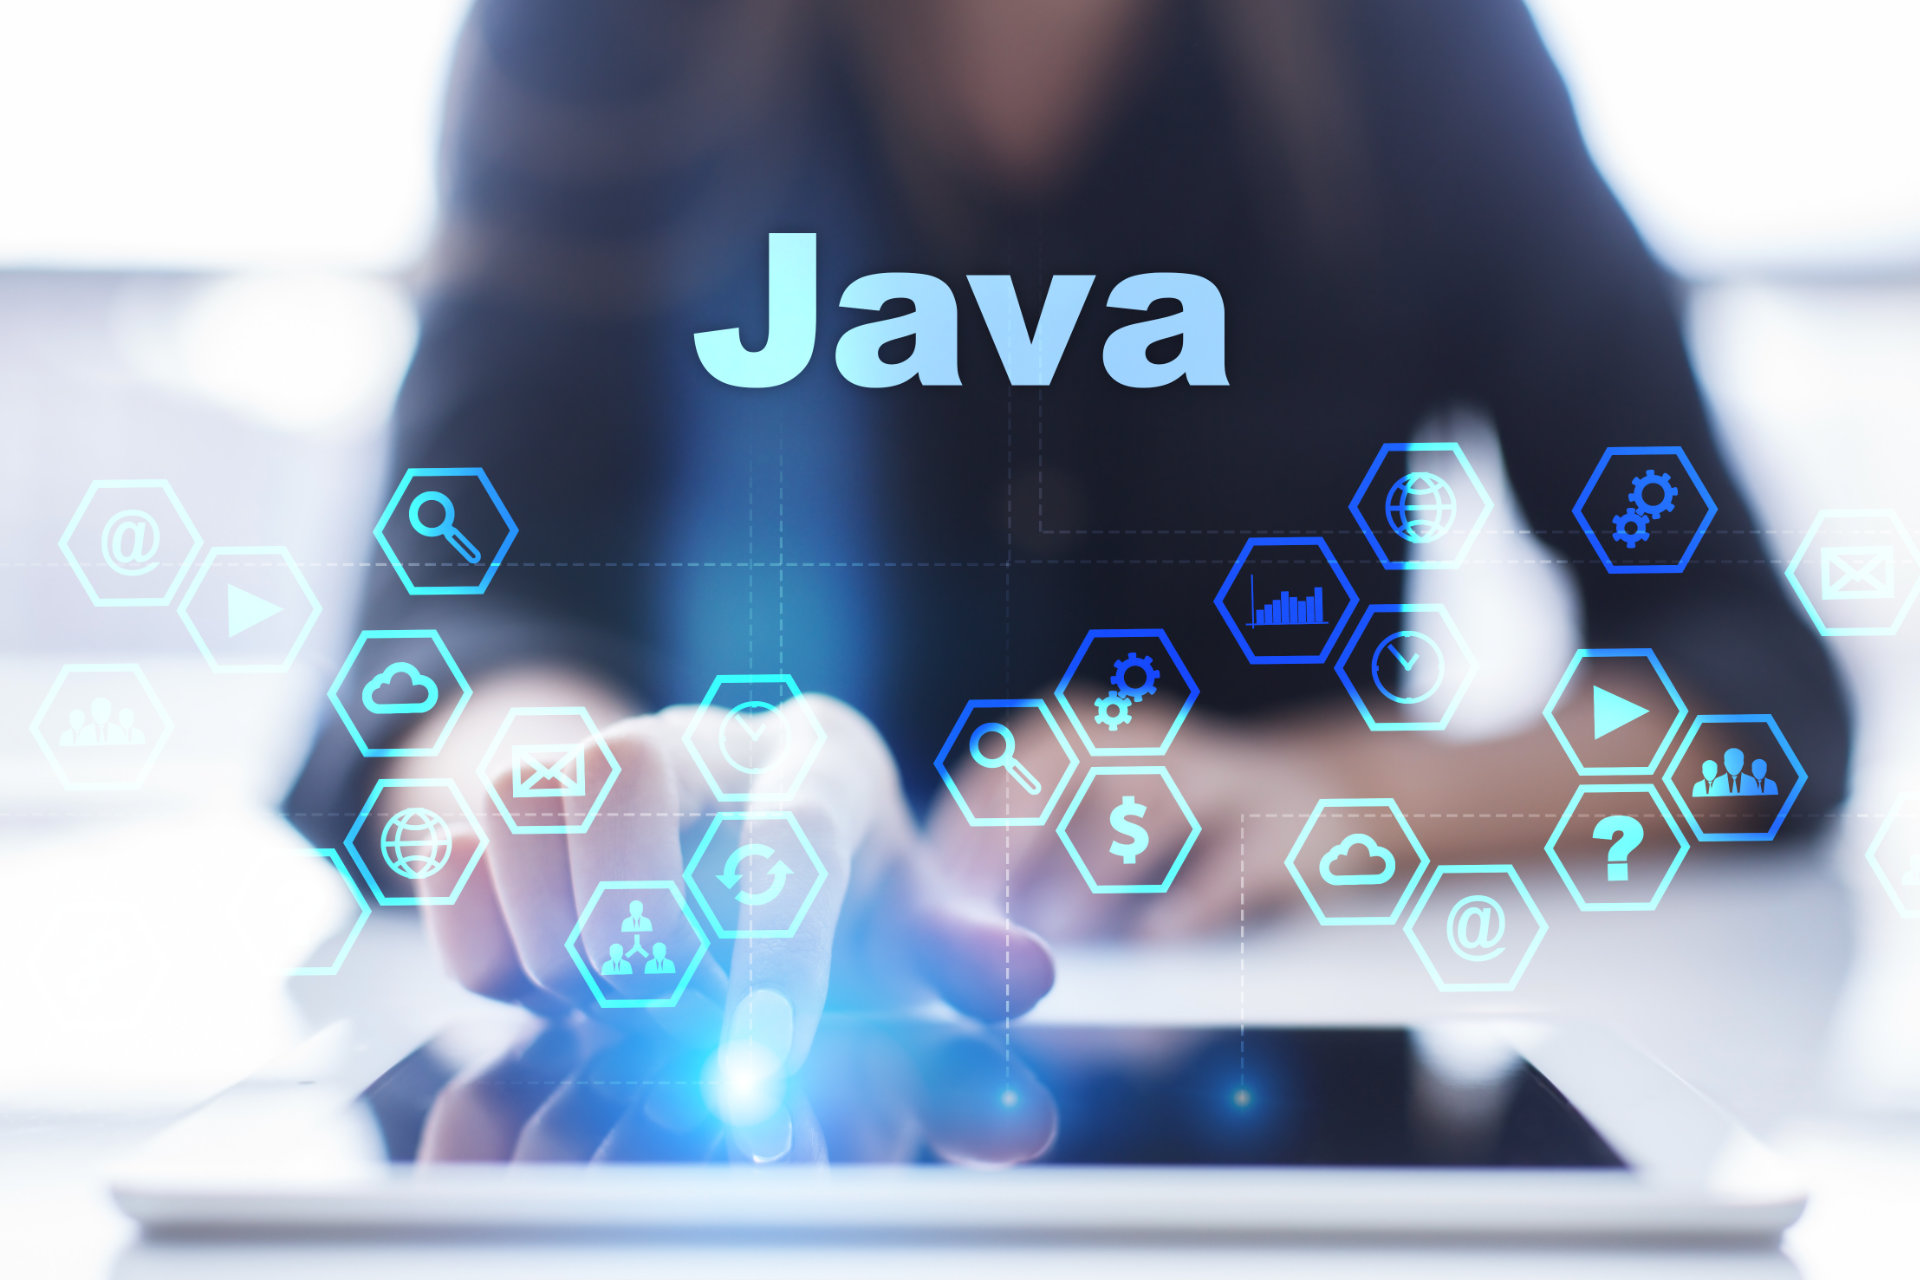 How to become a successful Java Developer